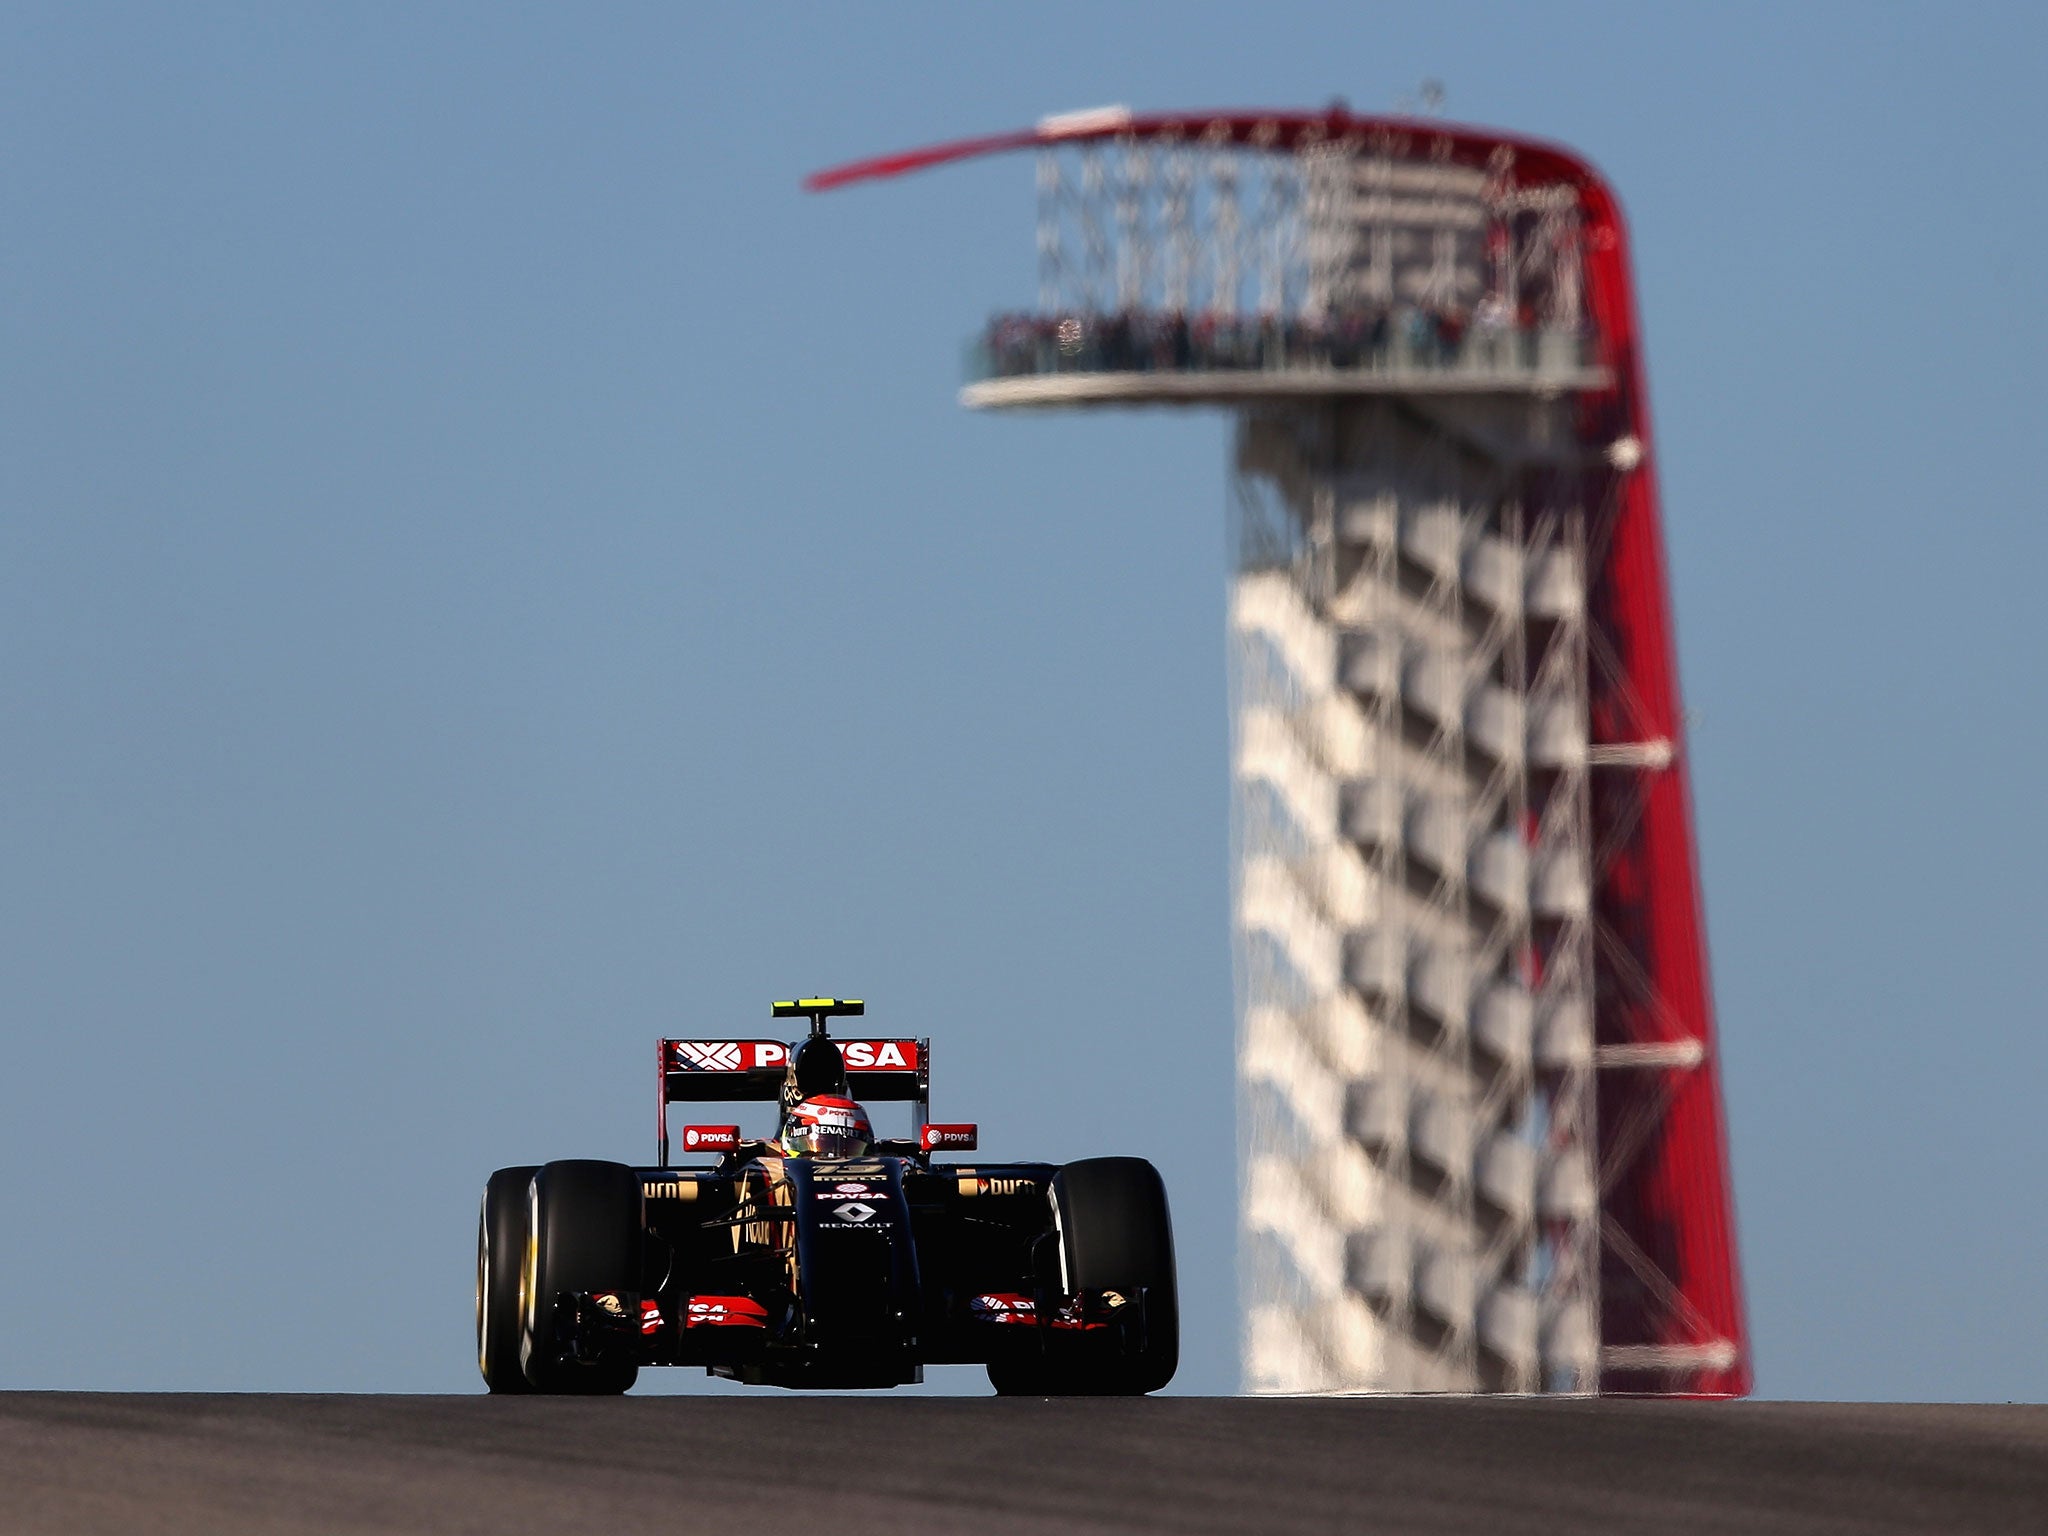 Romain Grosjean tackles the Circuit of the Americas during Friday practice